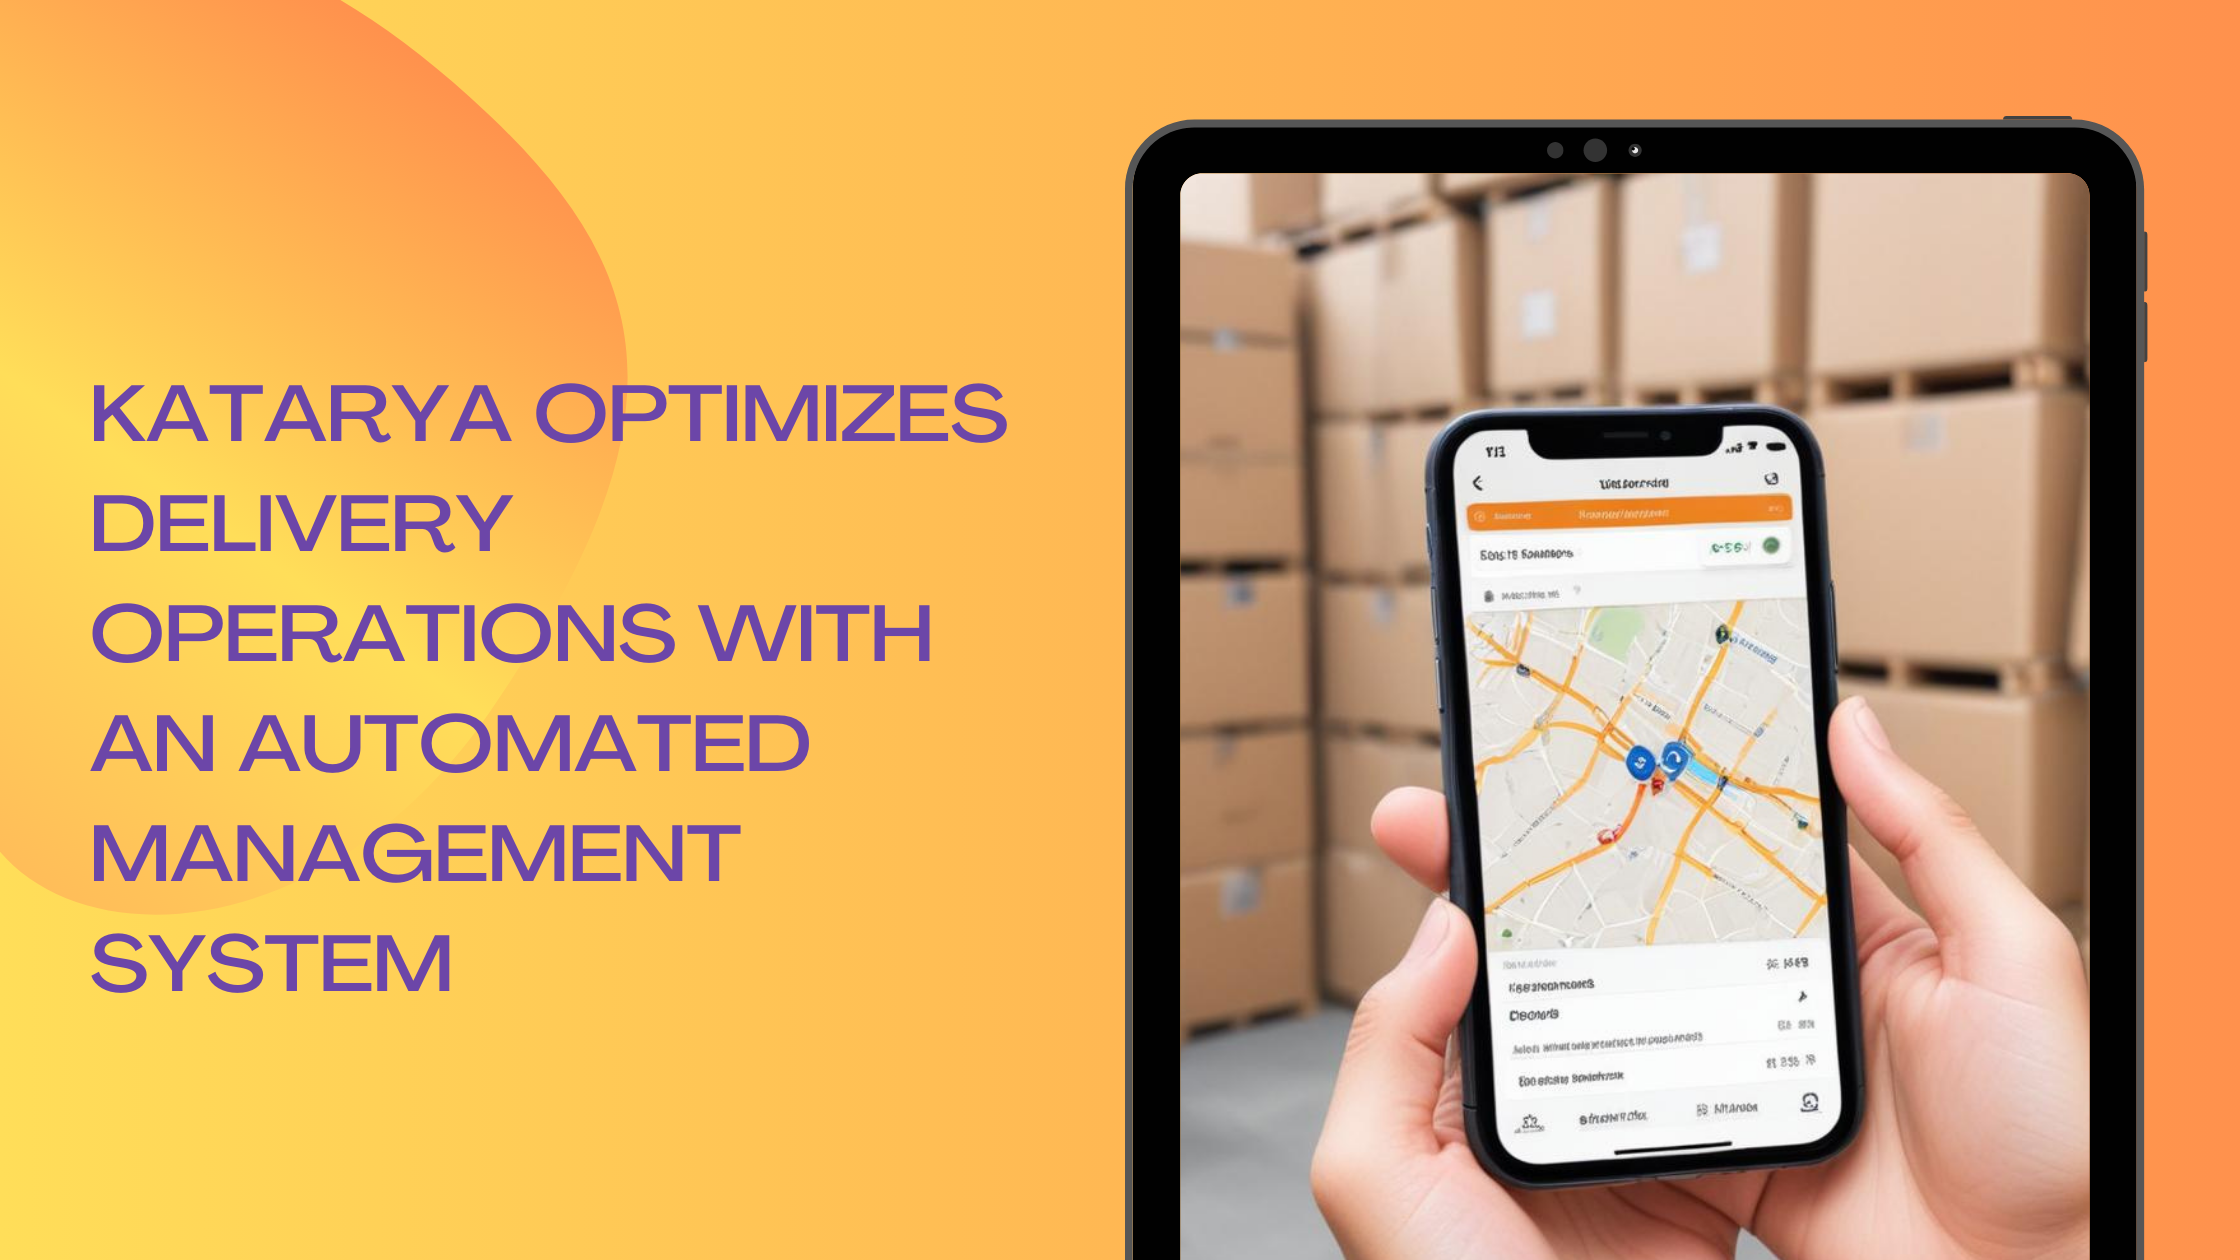 Katarya Optimizes Delivery Operations with an Automated Management System